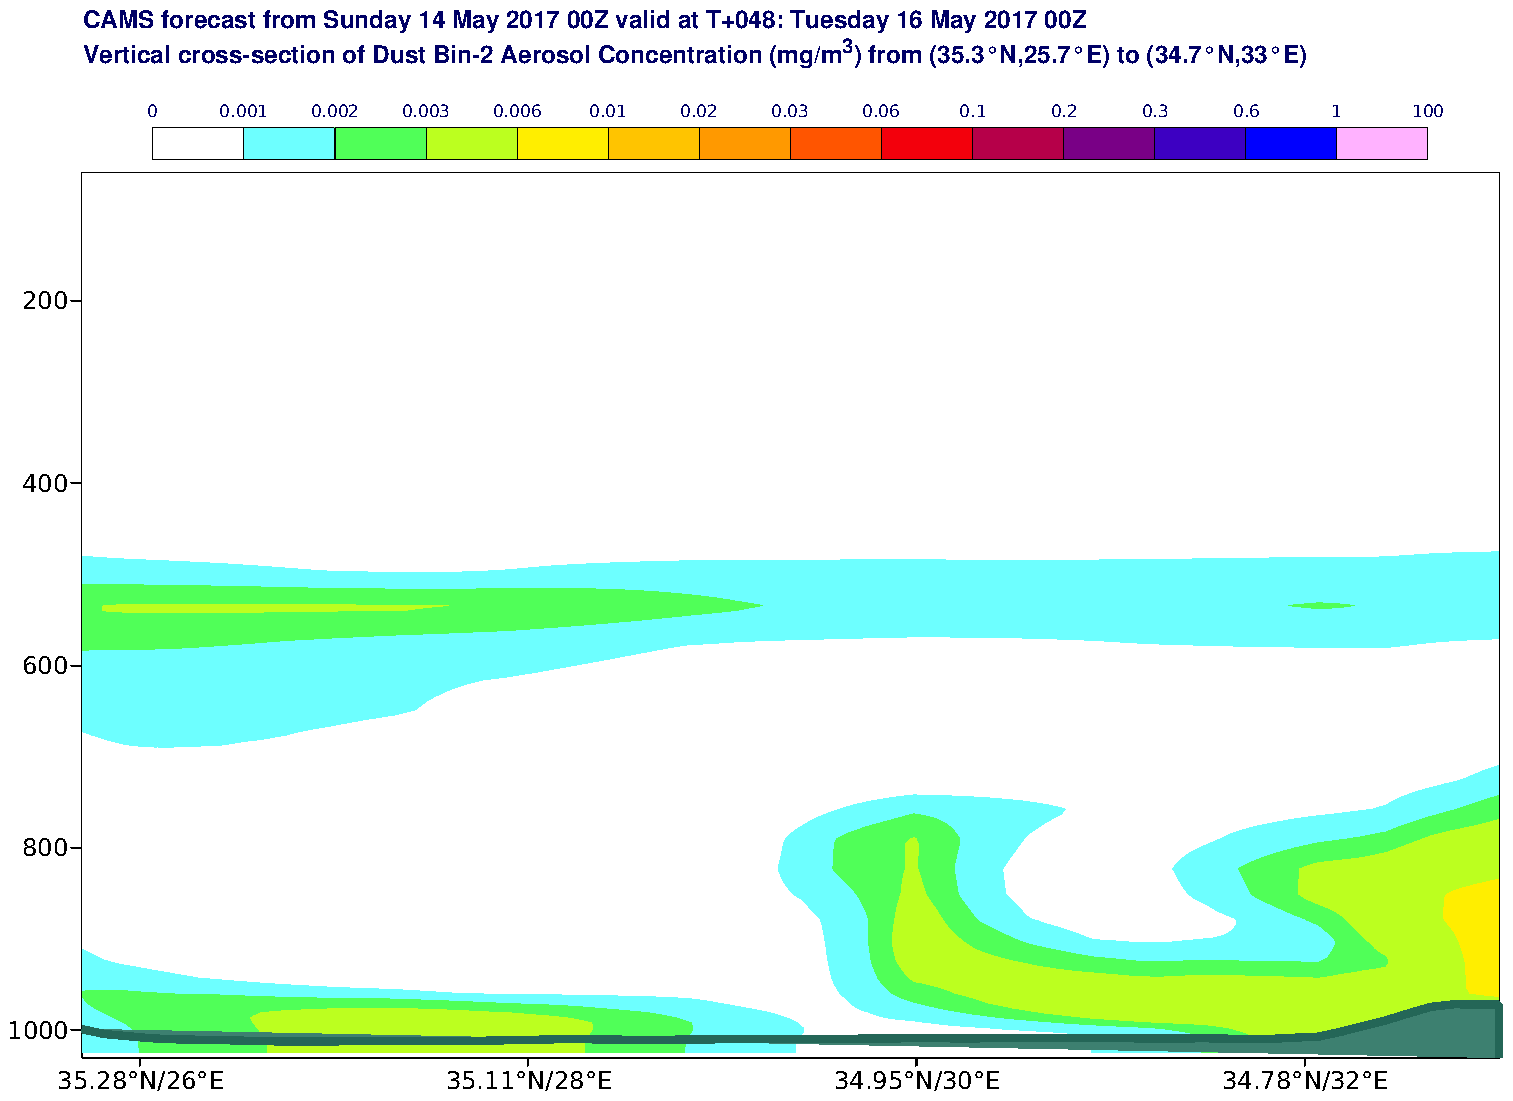 Vertical cross-section of Dust Bin-2 Aerosol Concentration (mg/m3) valid at T48 - 2017-05-16 00:00